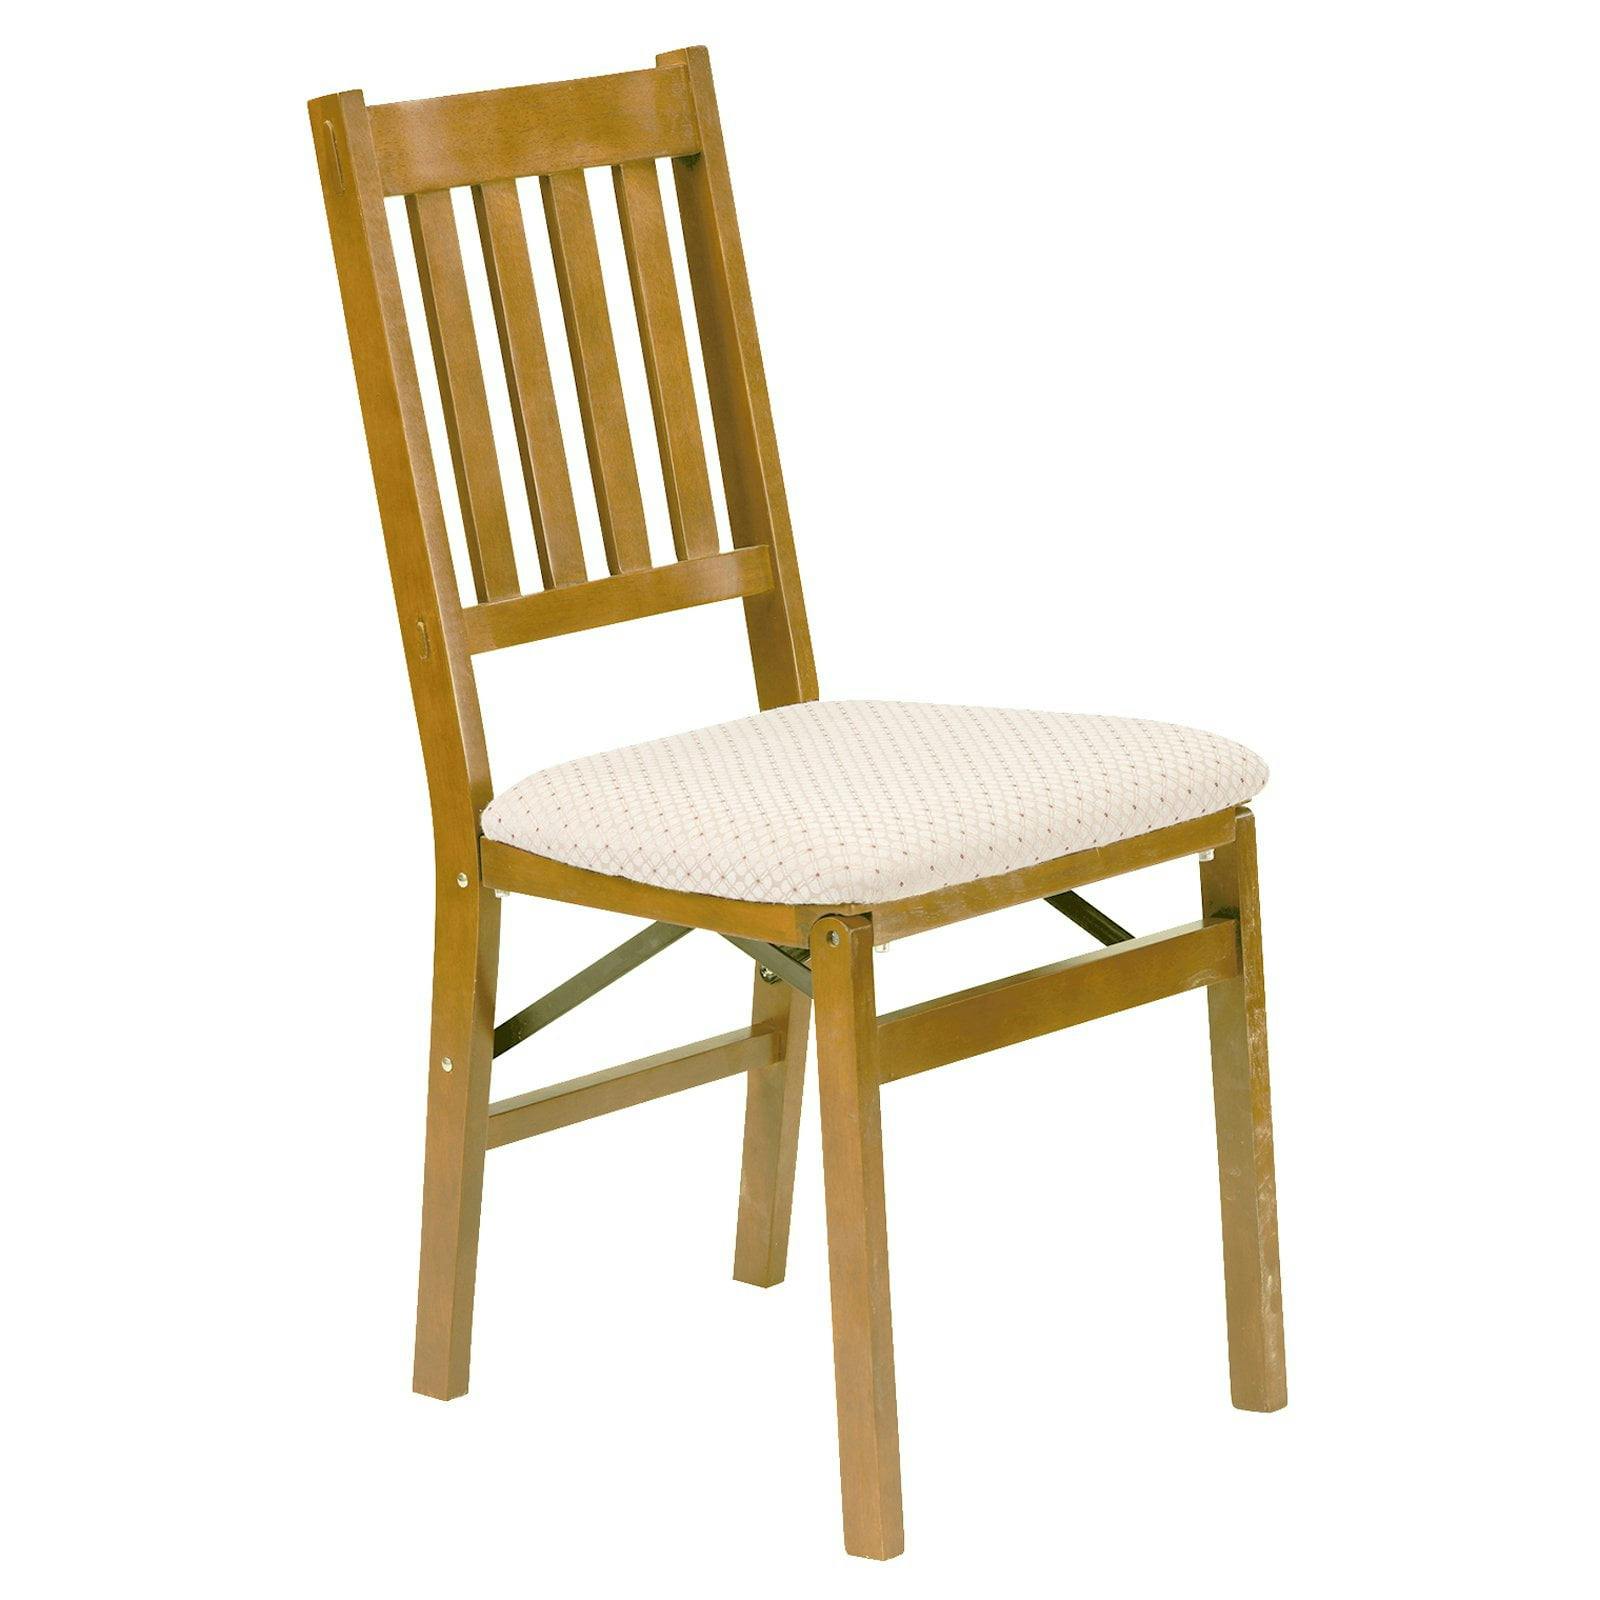 Arts and Craft Solid Oak Wood Folding Chair with Blush Upholstery